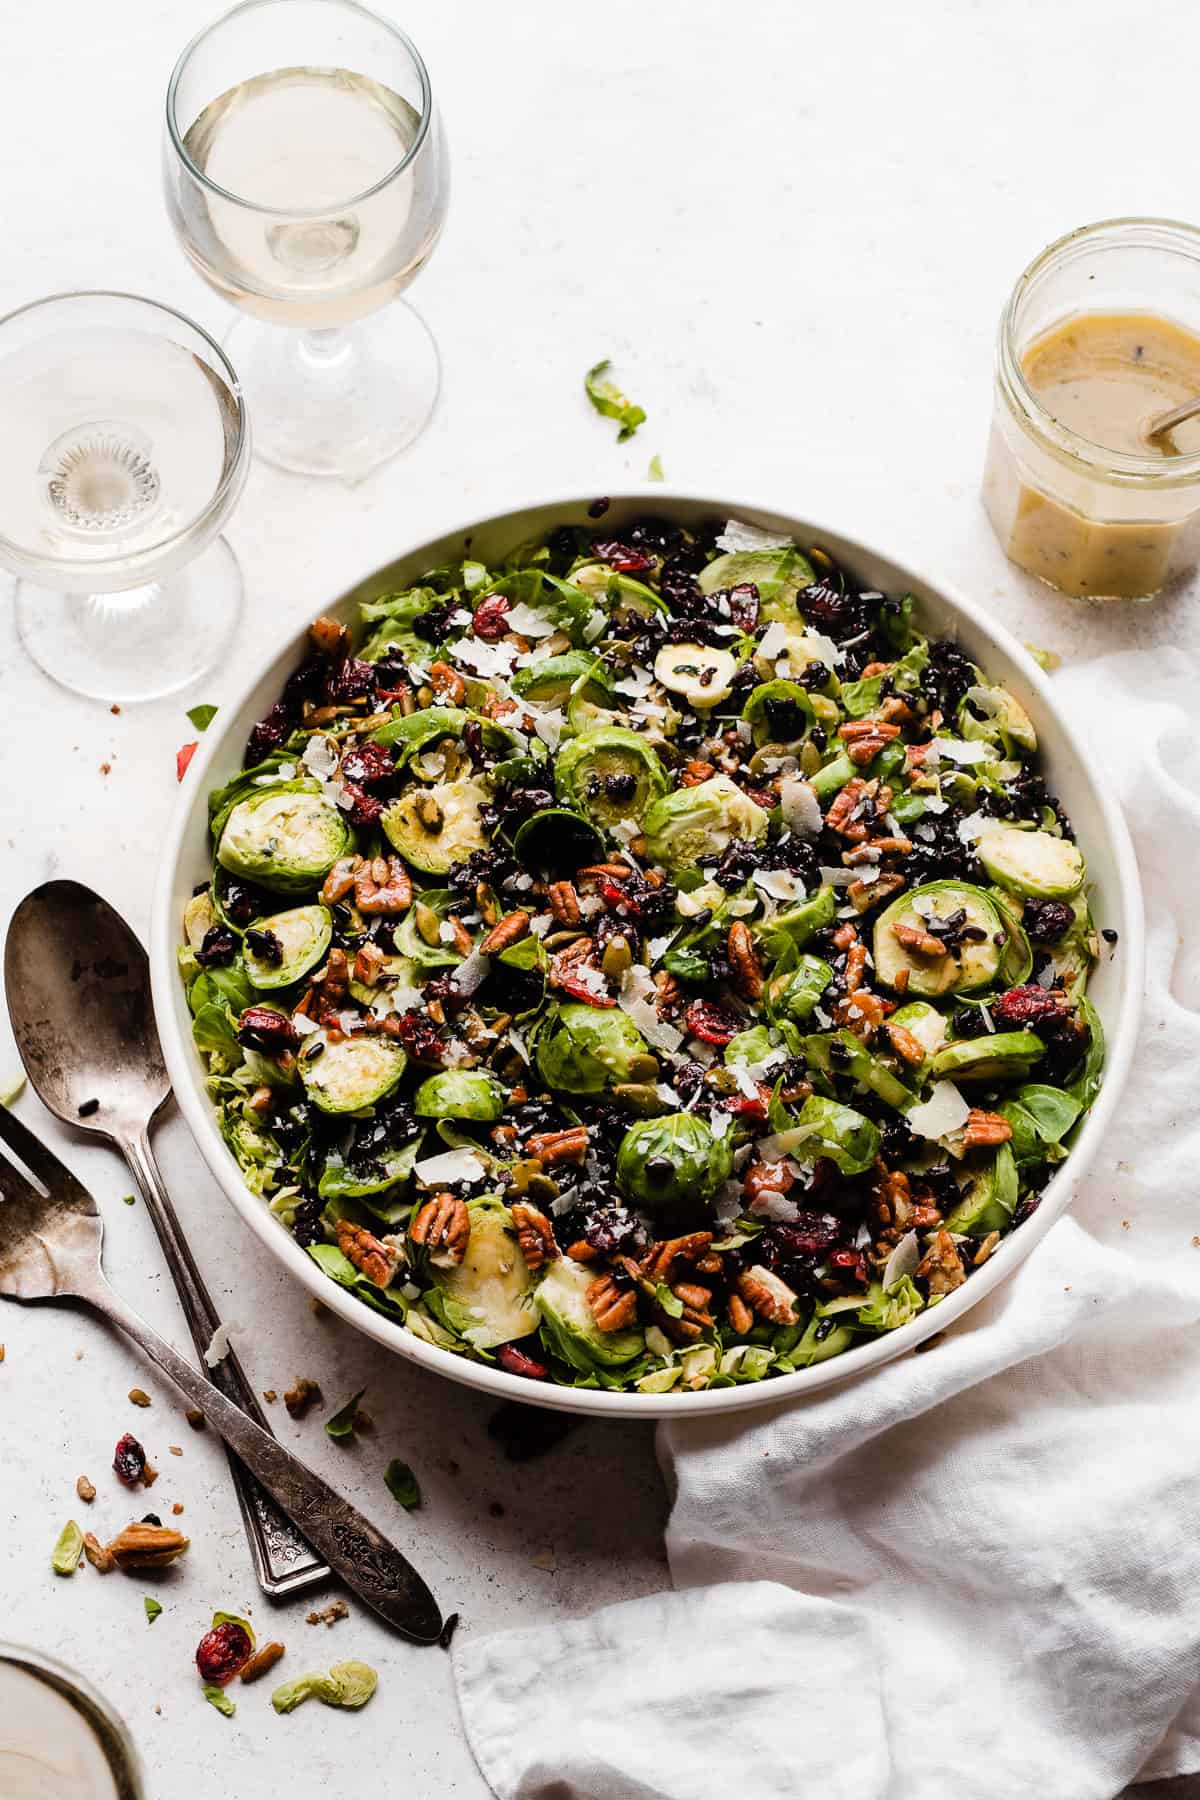 A bowl of brussels sprouts salad.